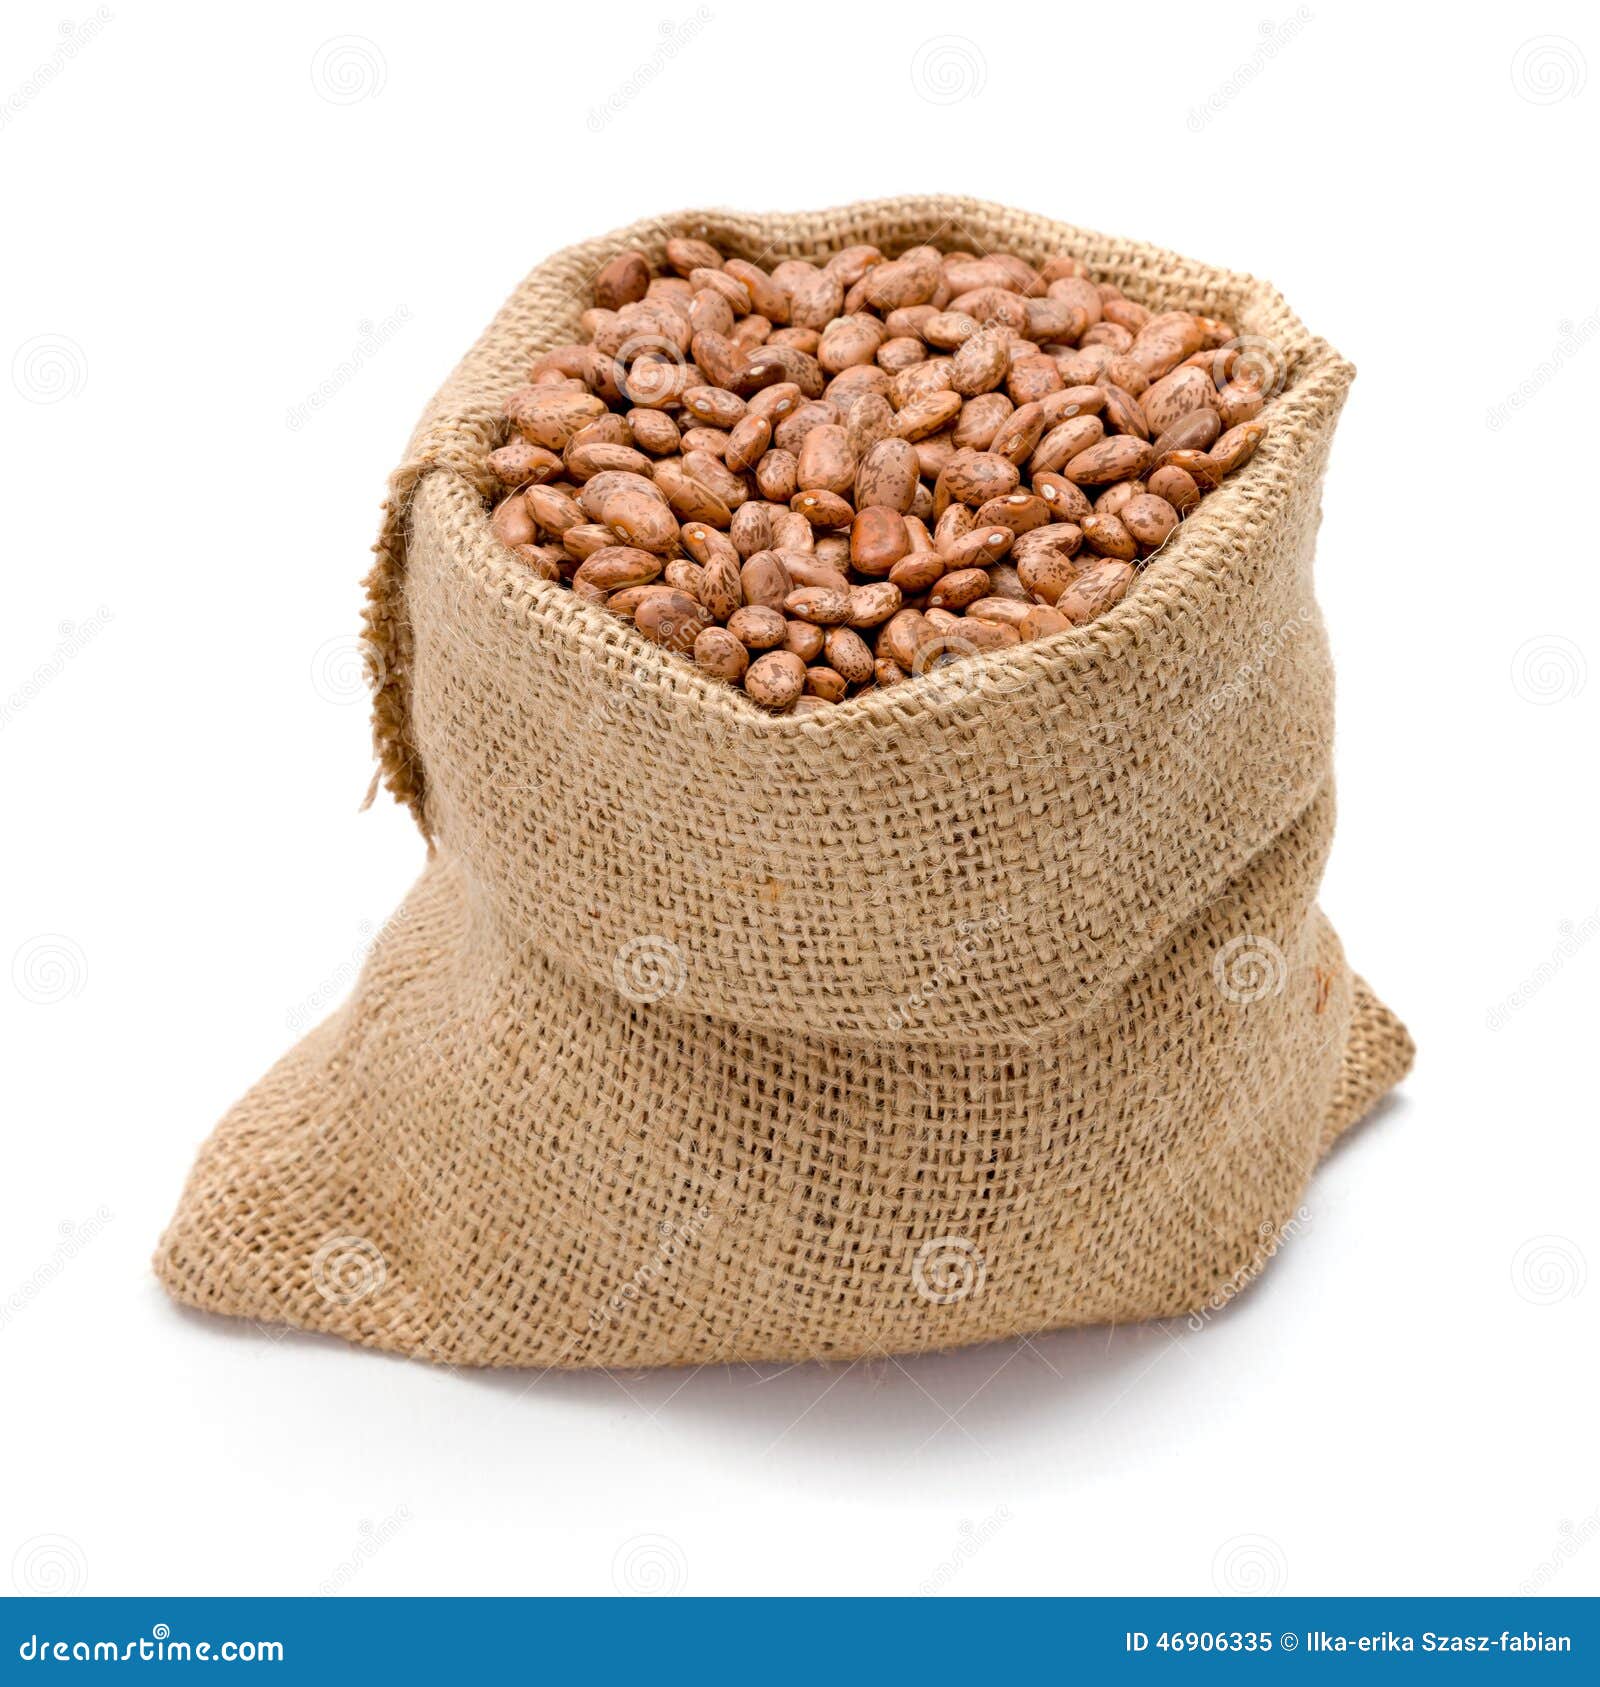 Pinto beans in burlap bag stock image. Image of healthy